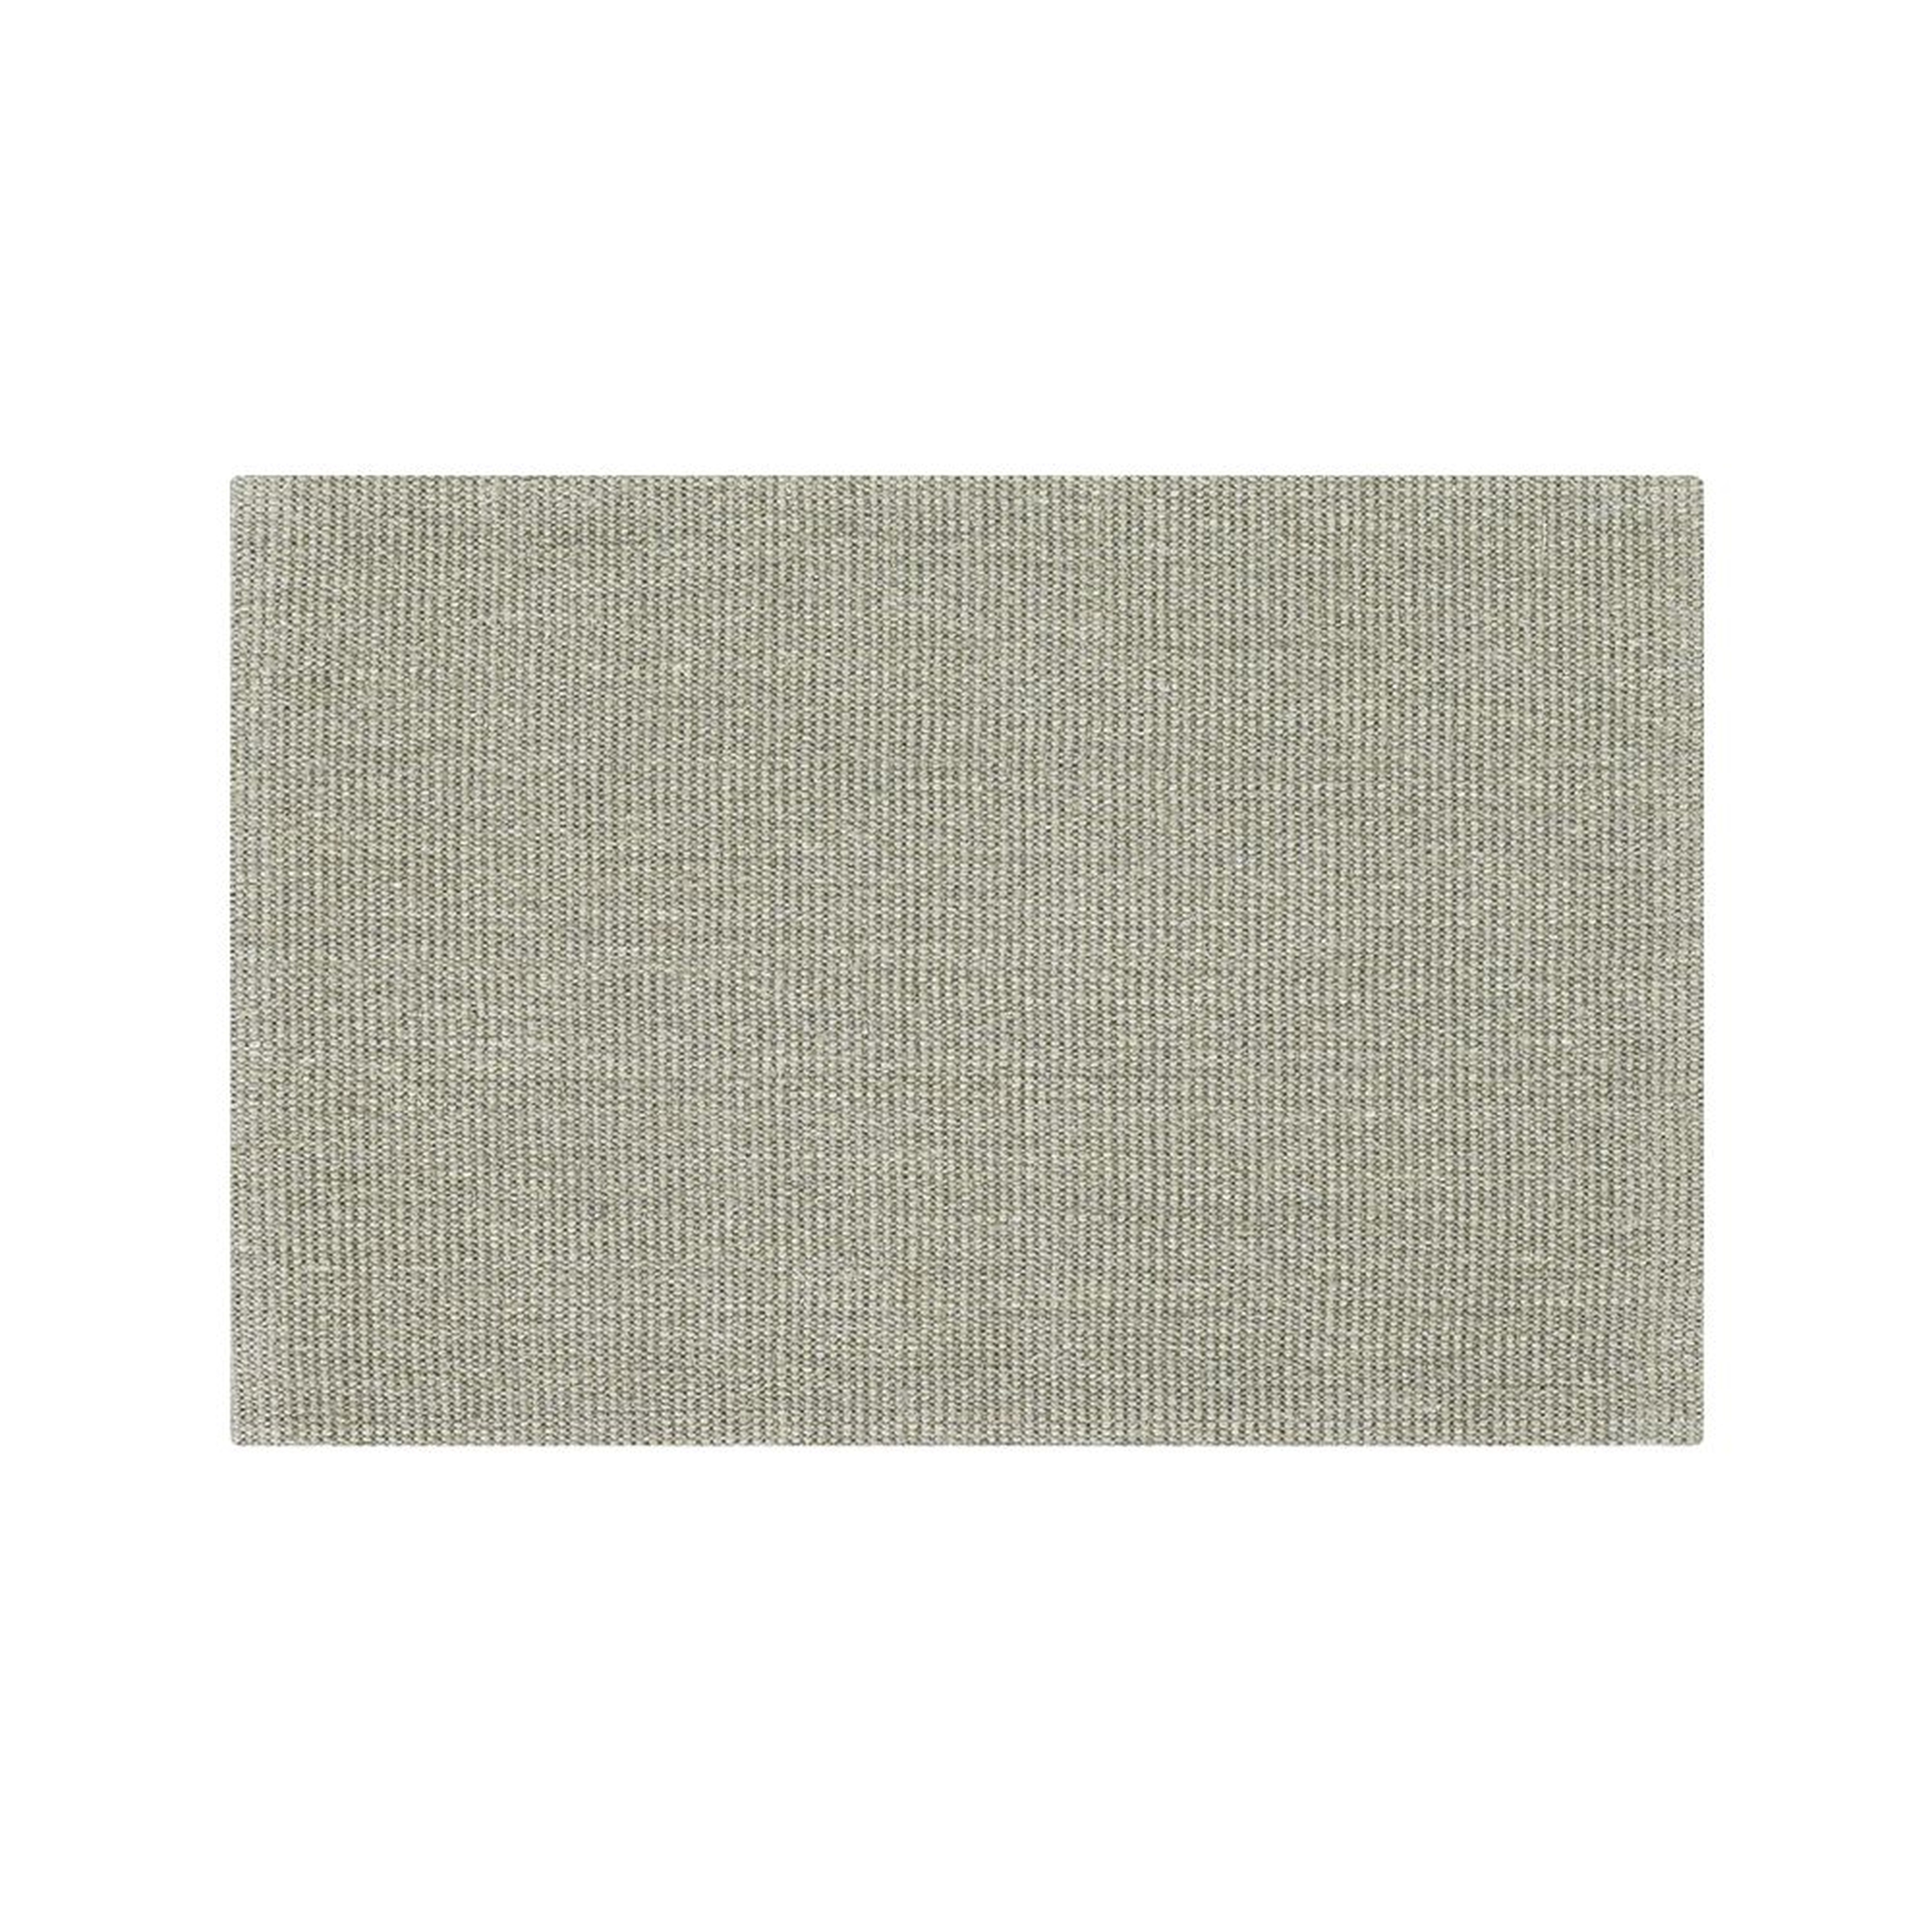 Sisal Dove Grey 8'x10' Area Rug - Crate and Barrel